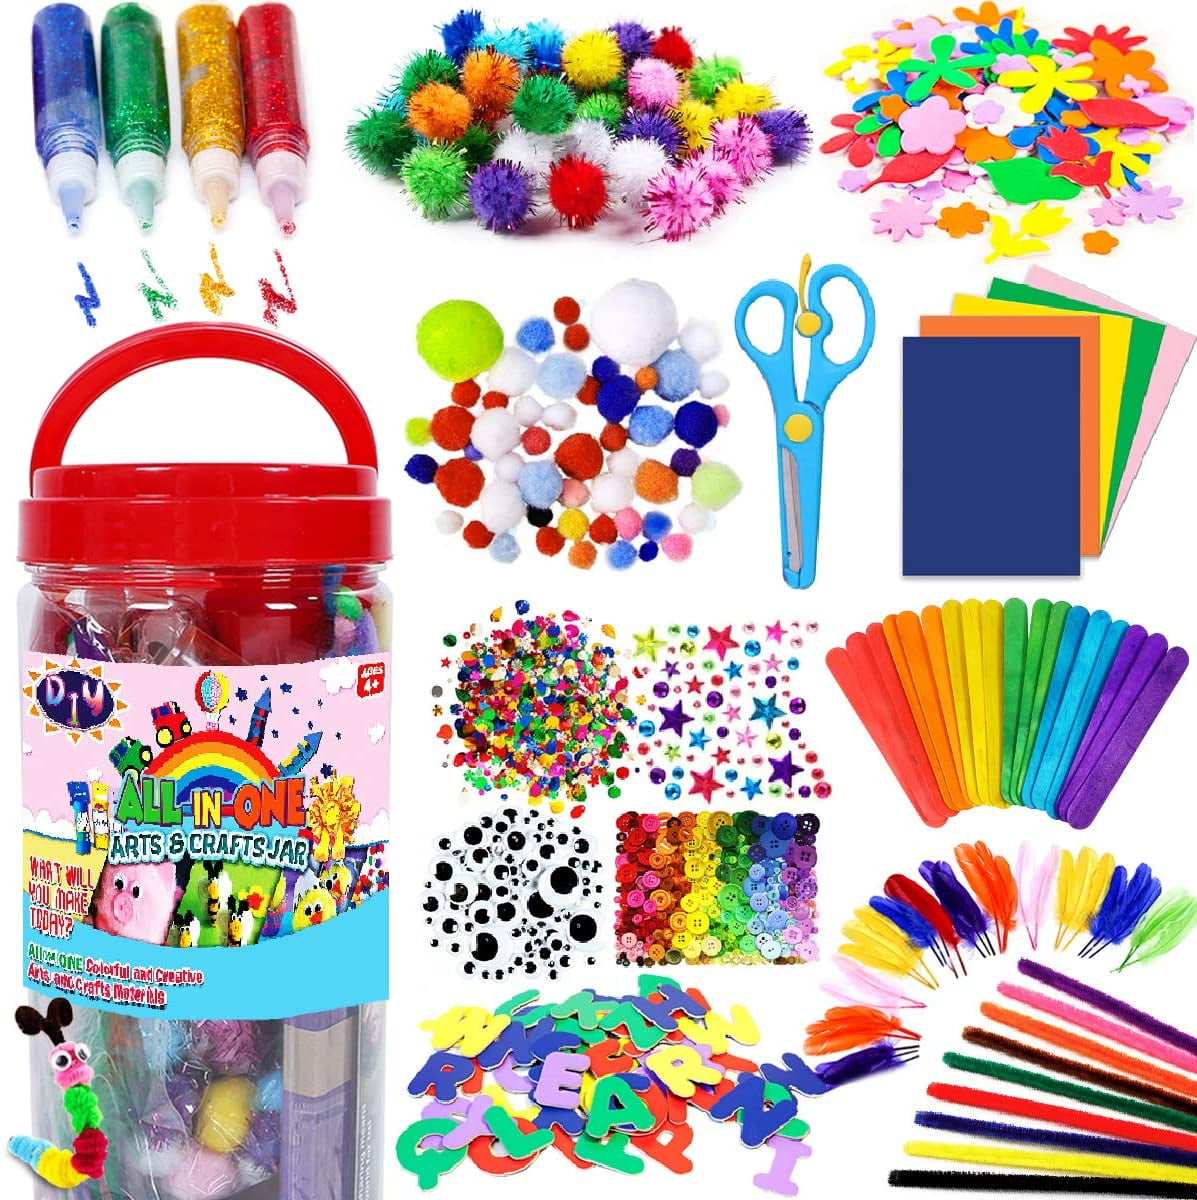 Caydo Arts and Crafts Supplies for Kids Over 1000 Pieces of Colorful and... 